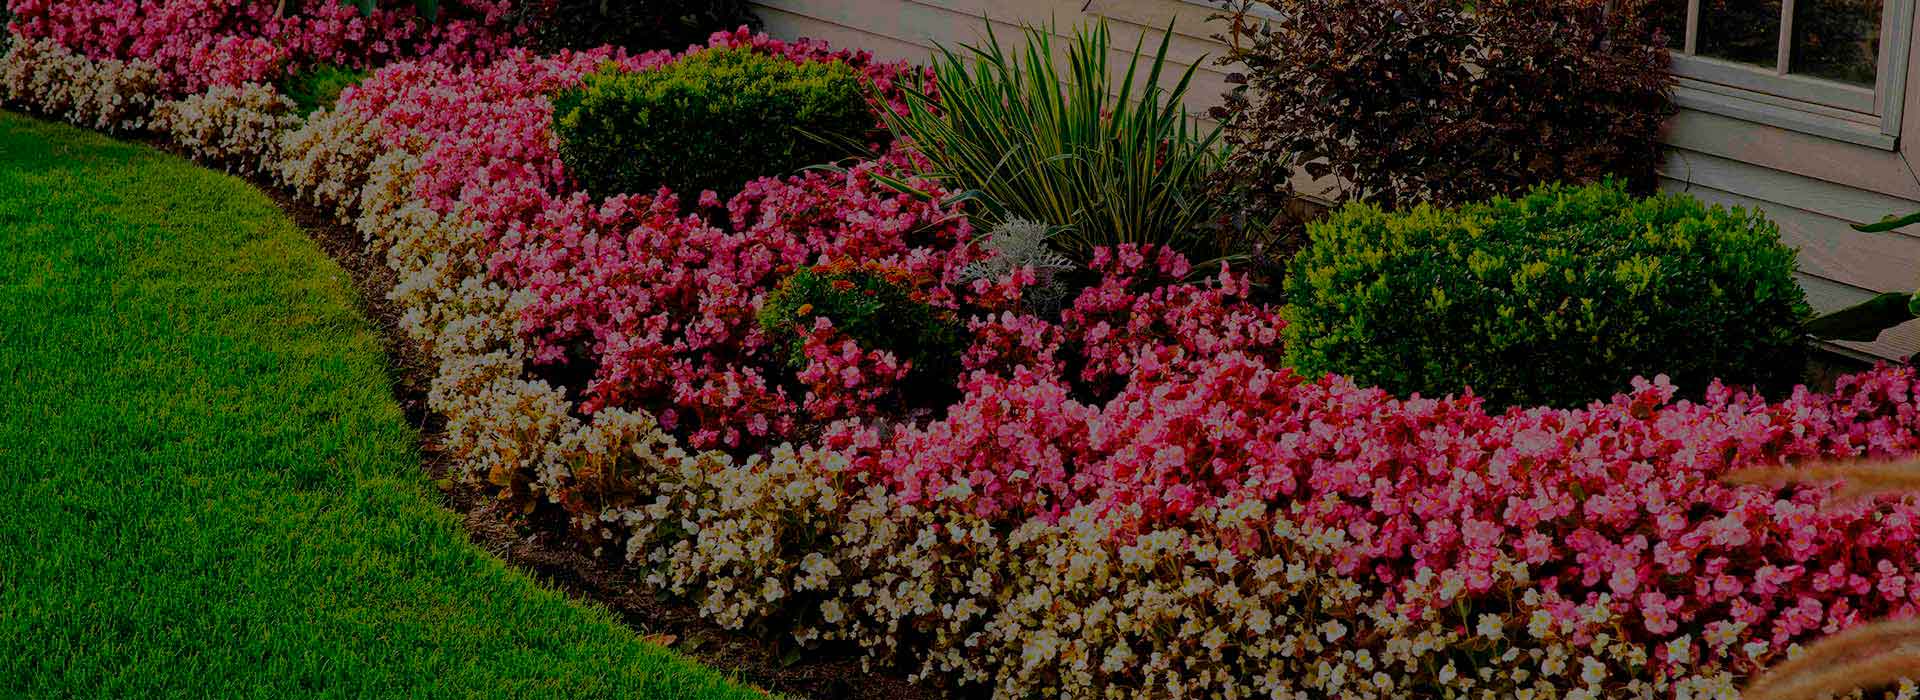 Home - Romero Landscaping & Lawn Care Services